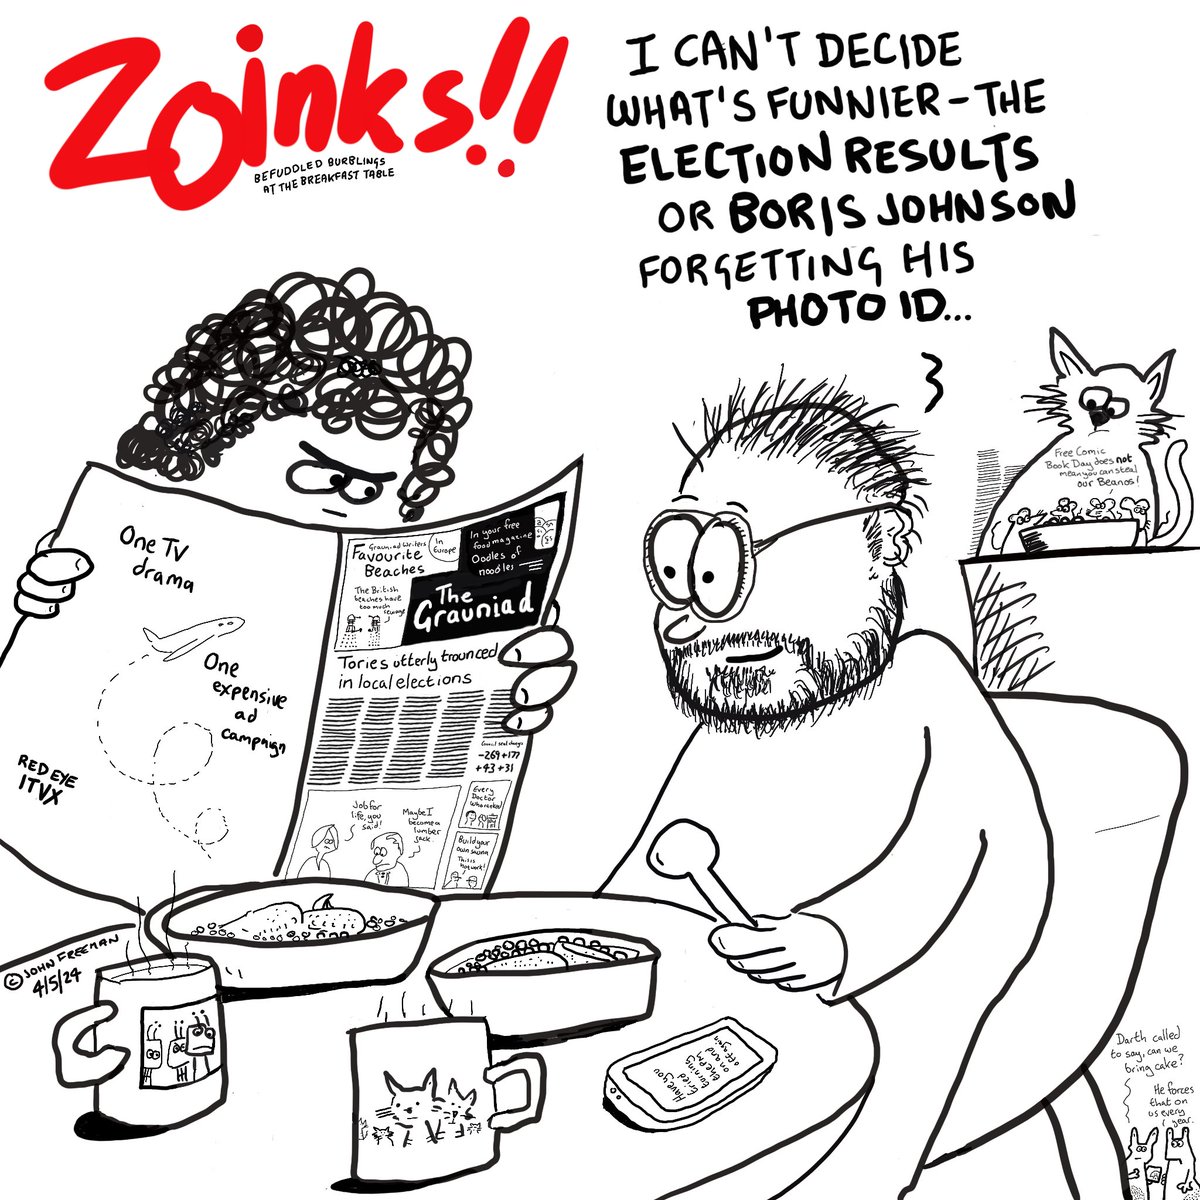 Zoinks!! By John Freeman, Saturday 4th May 2024.”I can’t decide what’s funnier - the election results or Boris Johnson forgetting his Photo ID…”